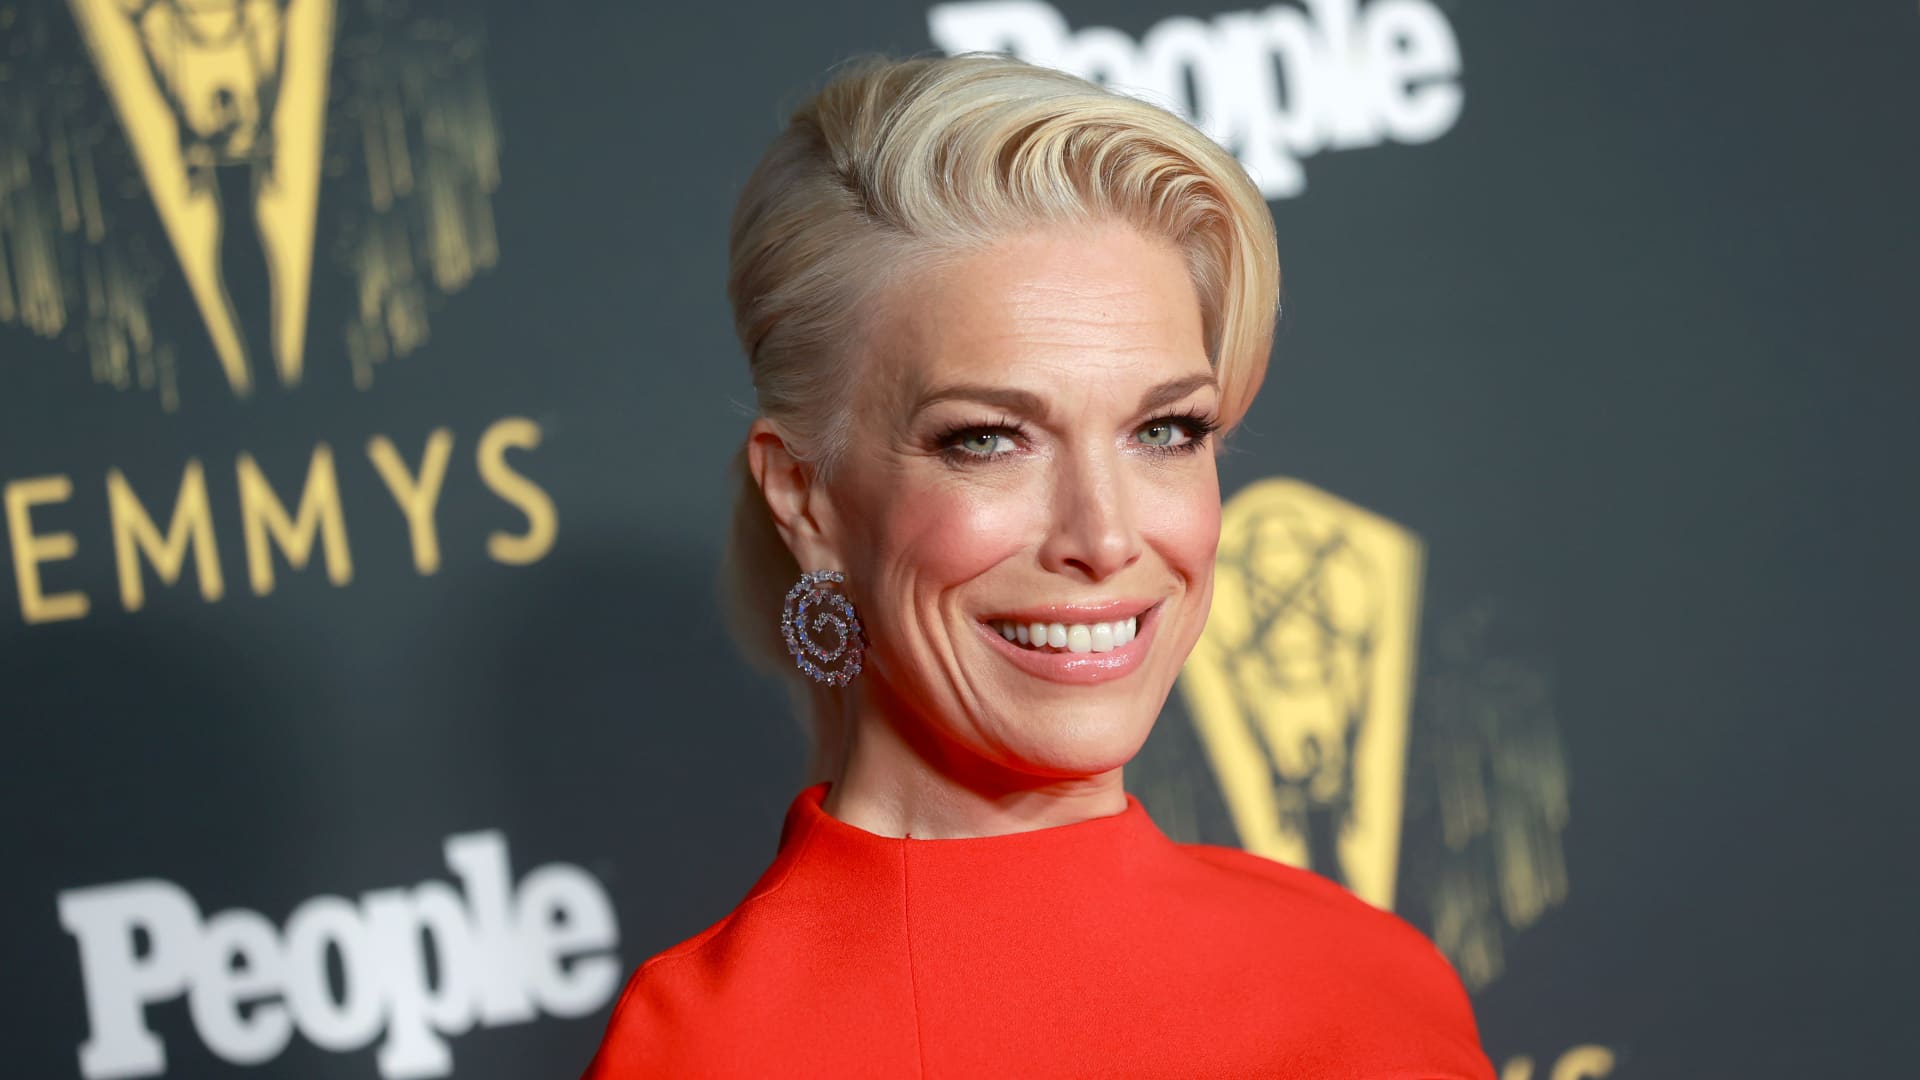 Hannah Waddingham attends the Television Academy's Reception to Honor 73rd Emmy Award Nominees at Television Academy on September 17, 2021 in Los Angeles, California.